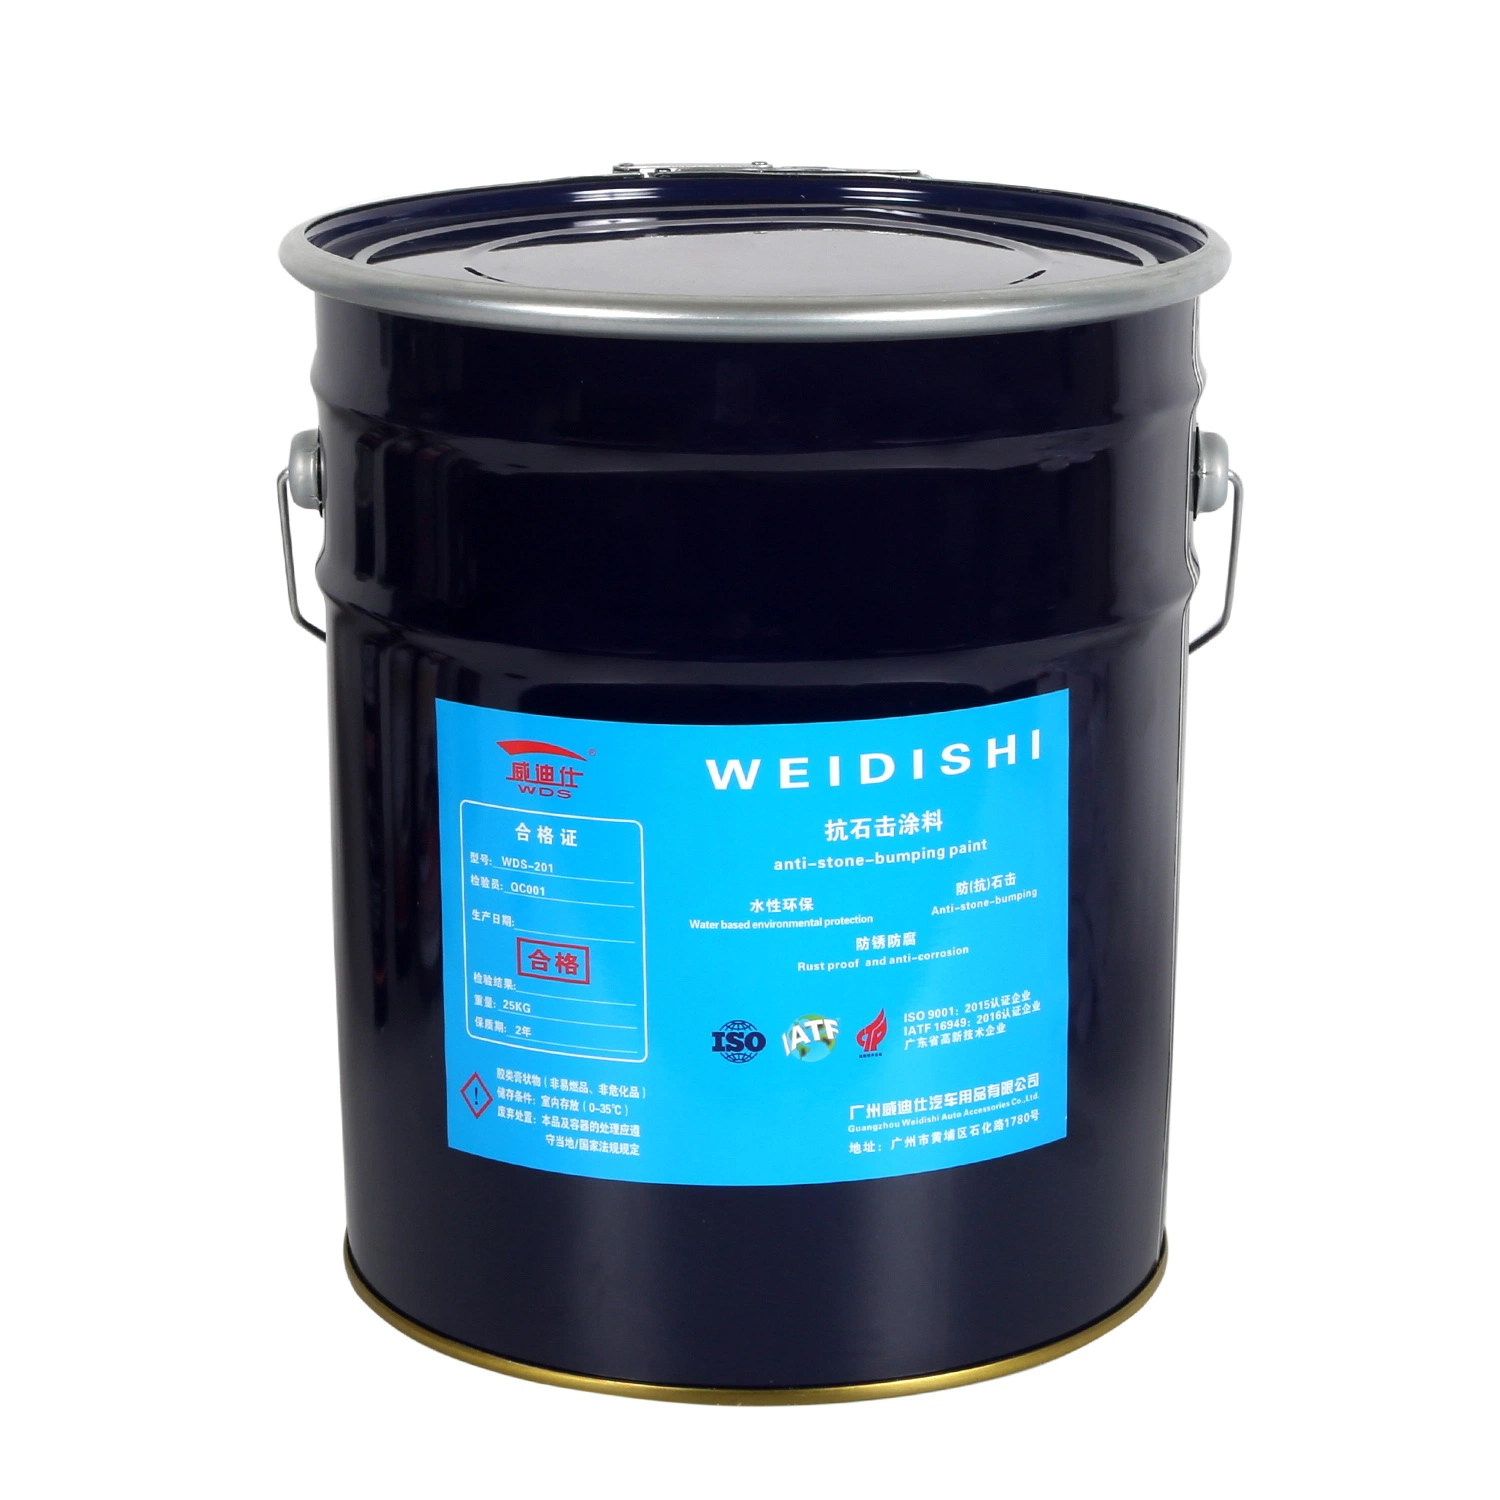 New Product Fire Proof Spray Paint Coating